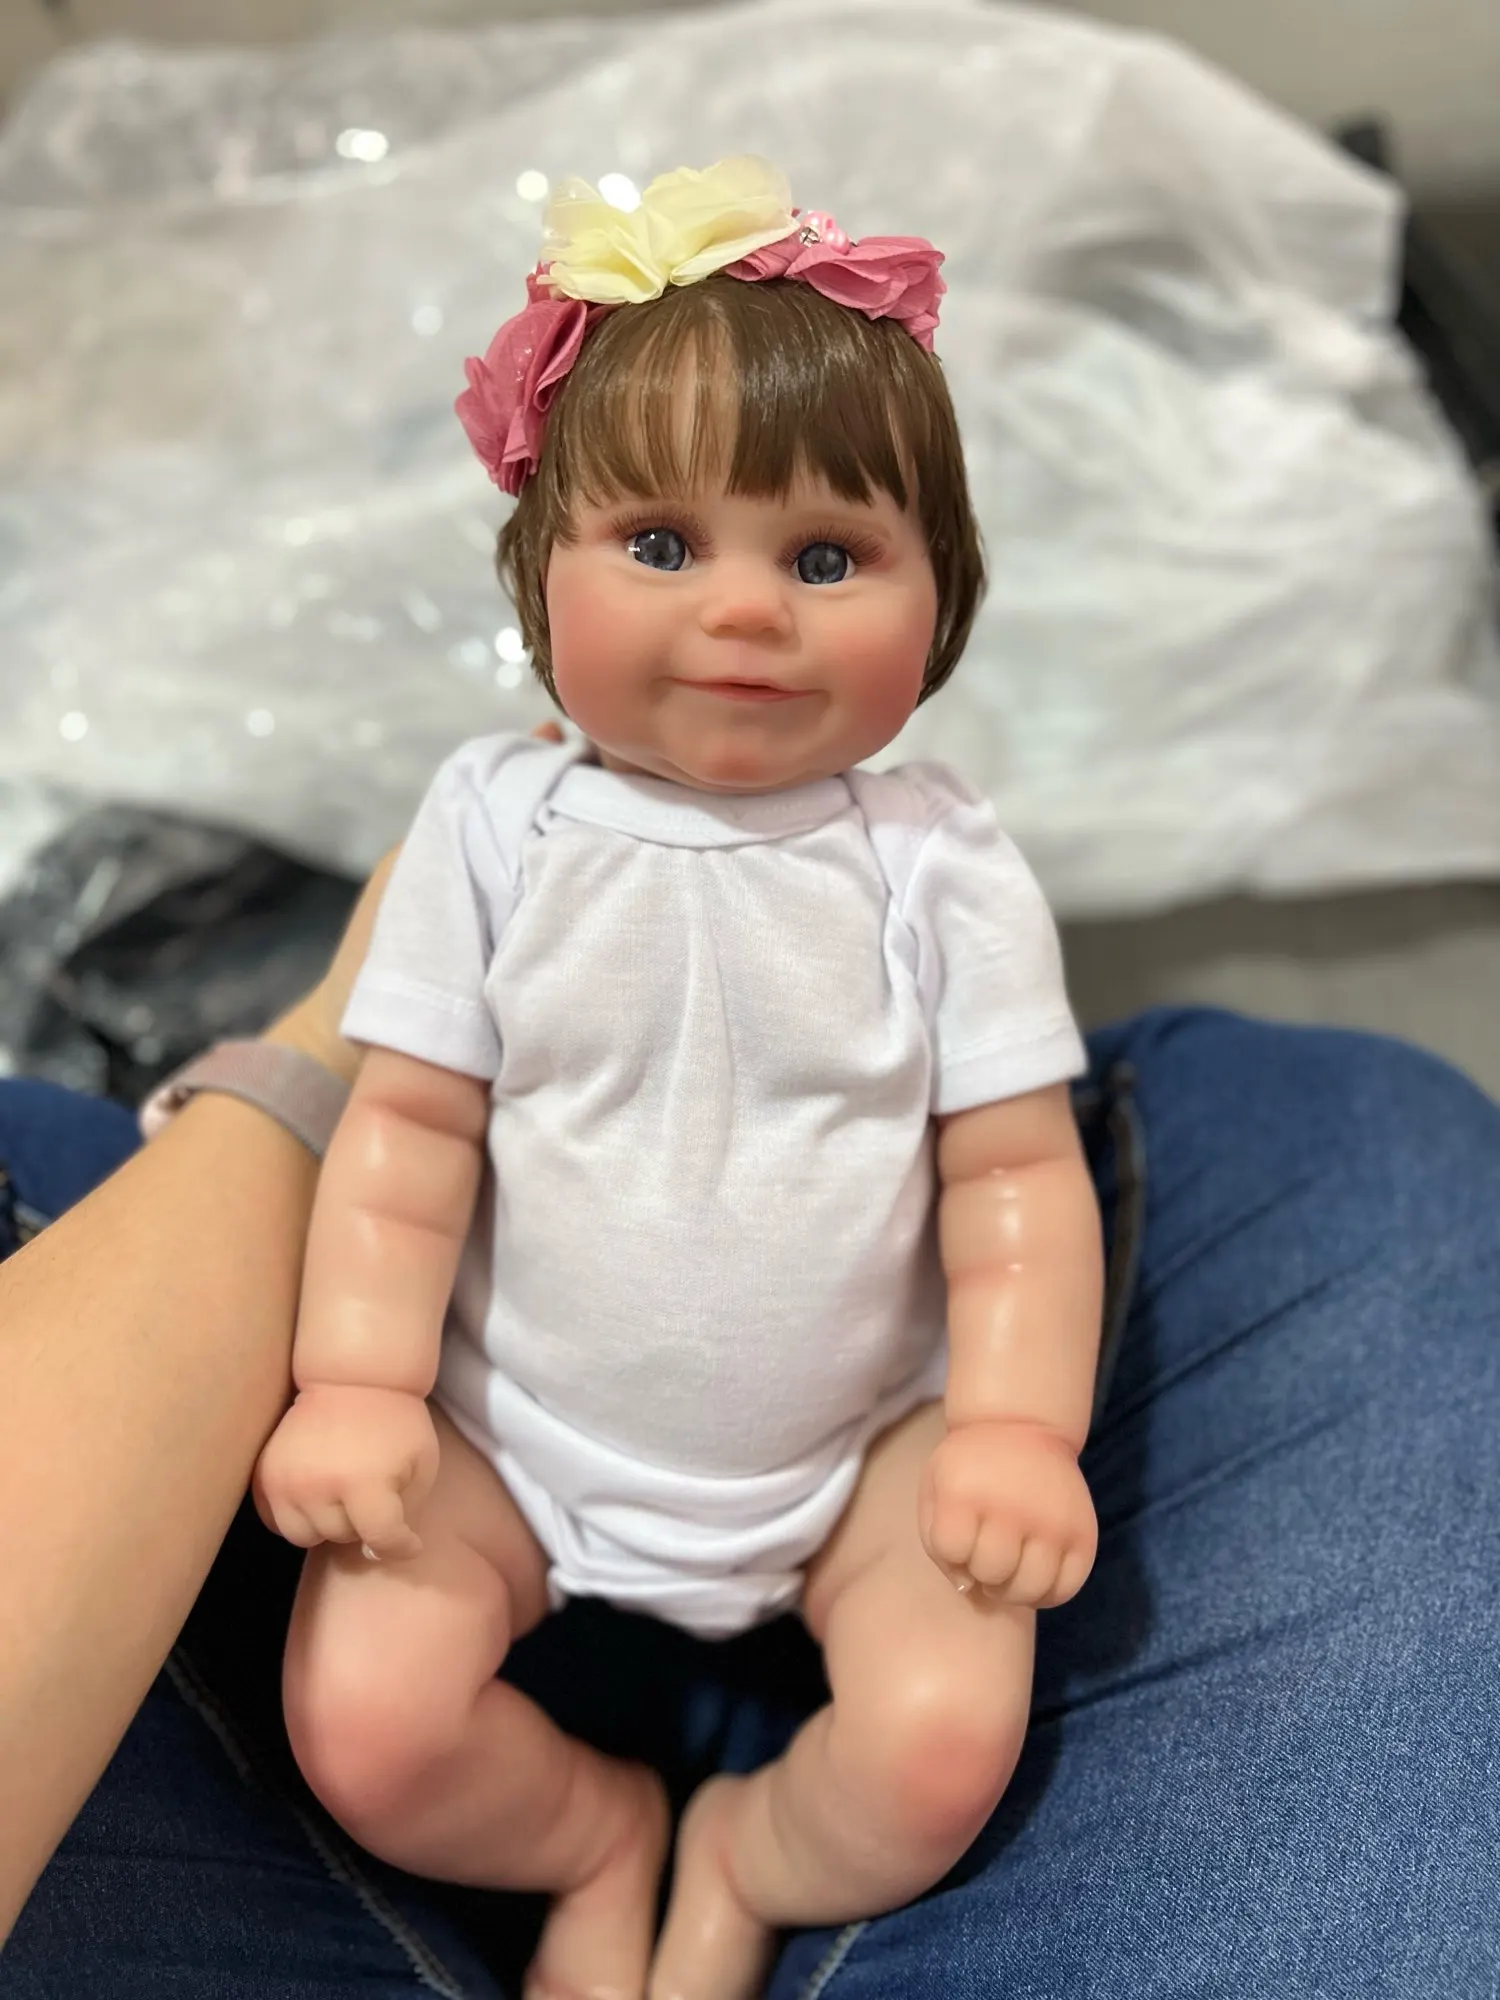 50CM Full Vinyl Body Girl Waterproof Reborn Doll Maddie Hand-Detailed Painted with Visible Veins Lifelike 3D Skin Tone Toy Gift photo review